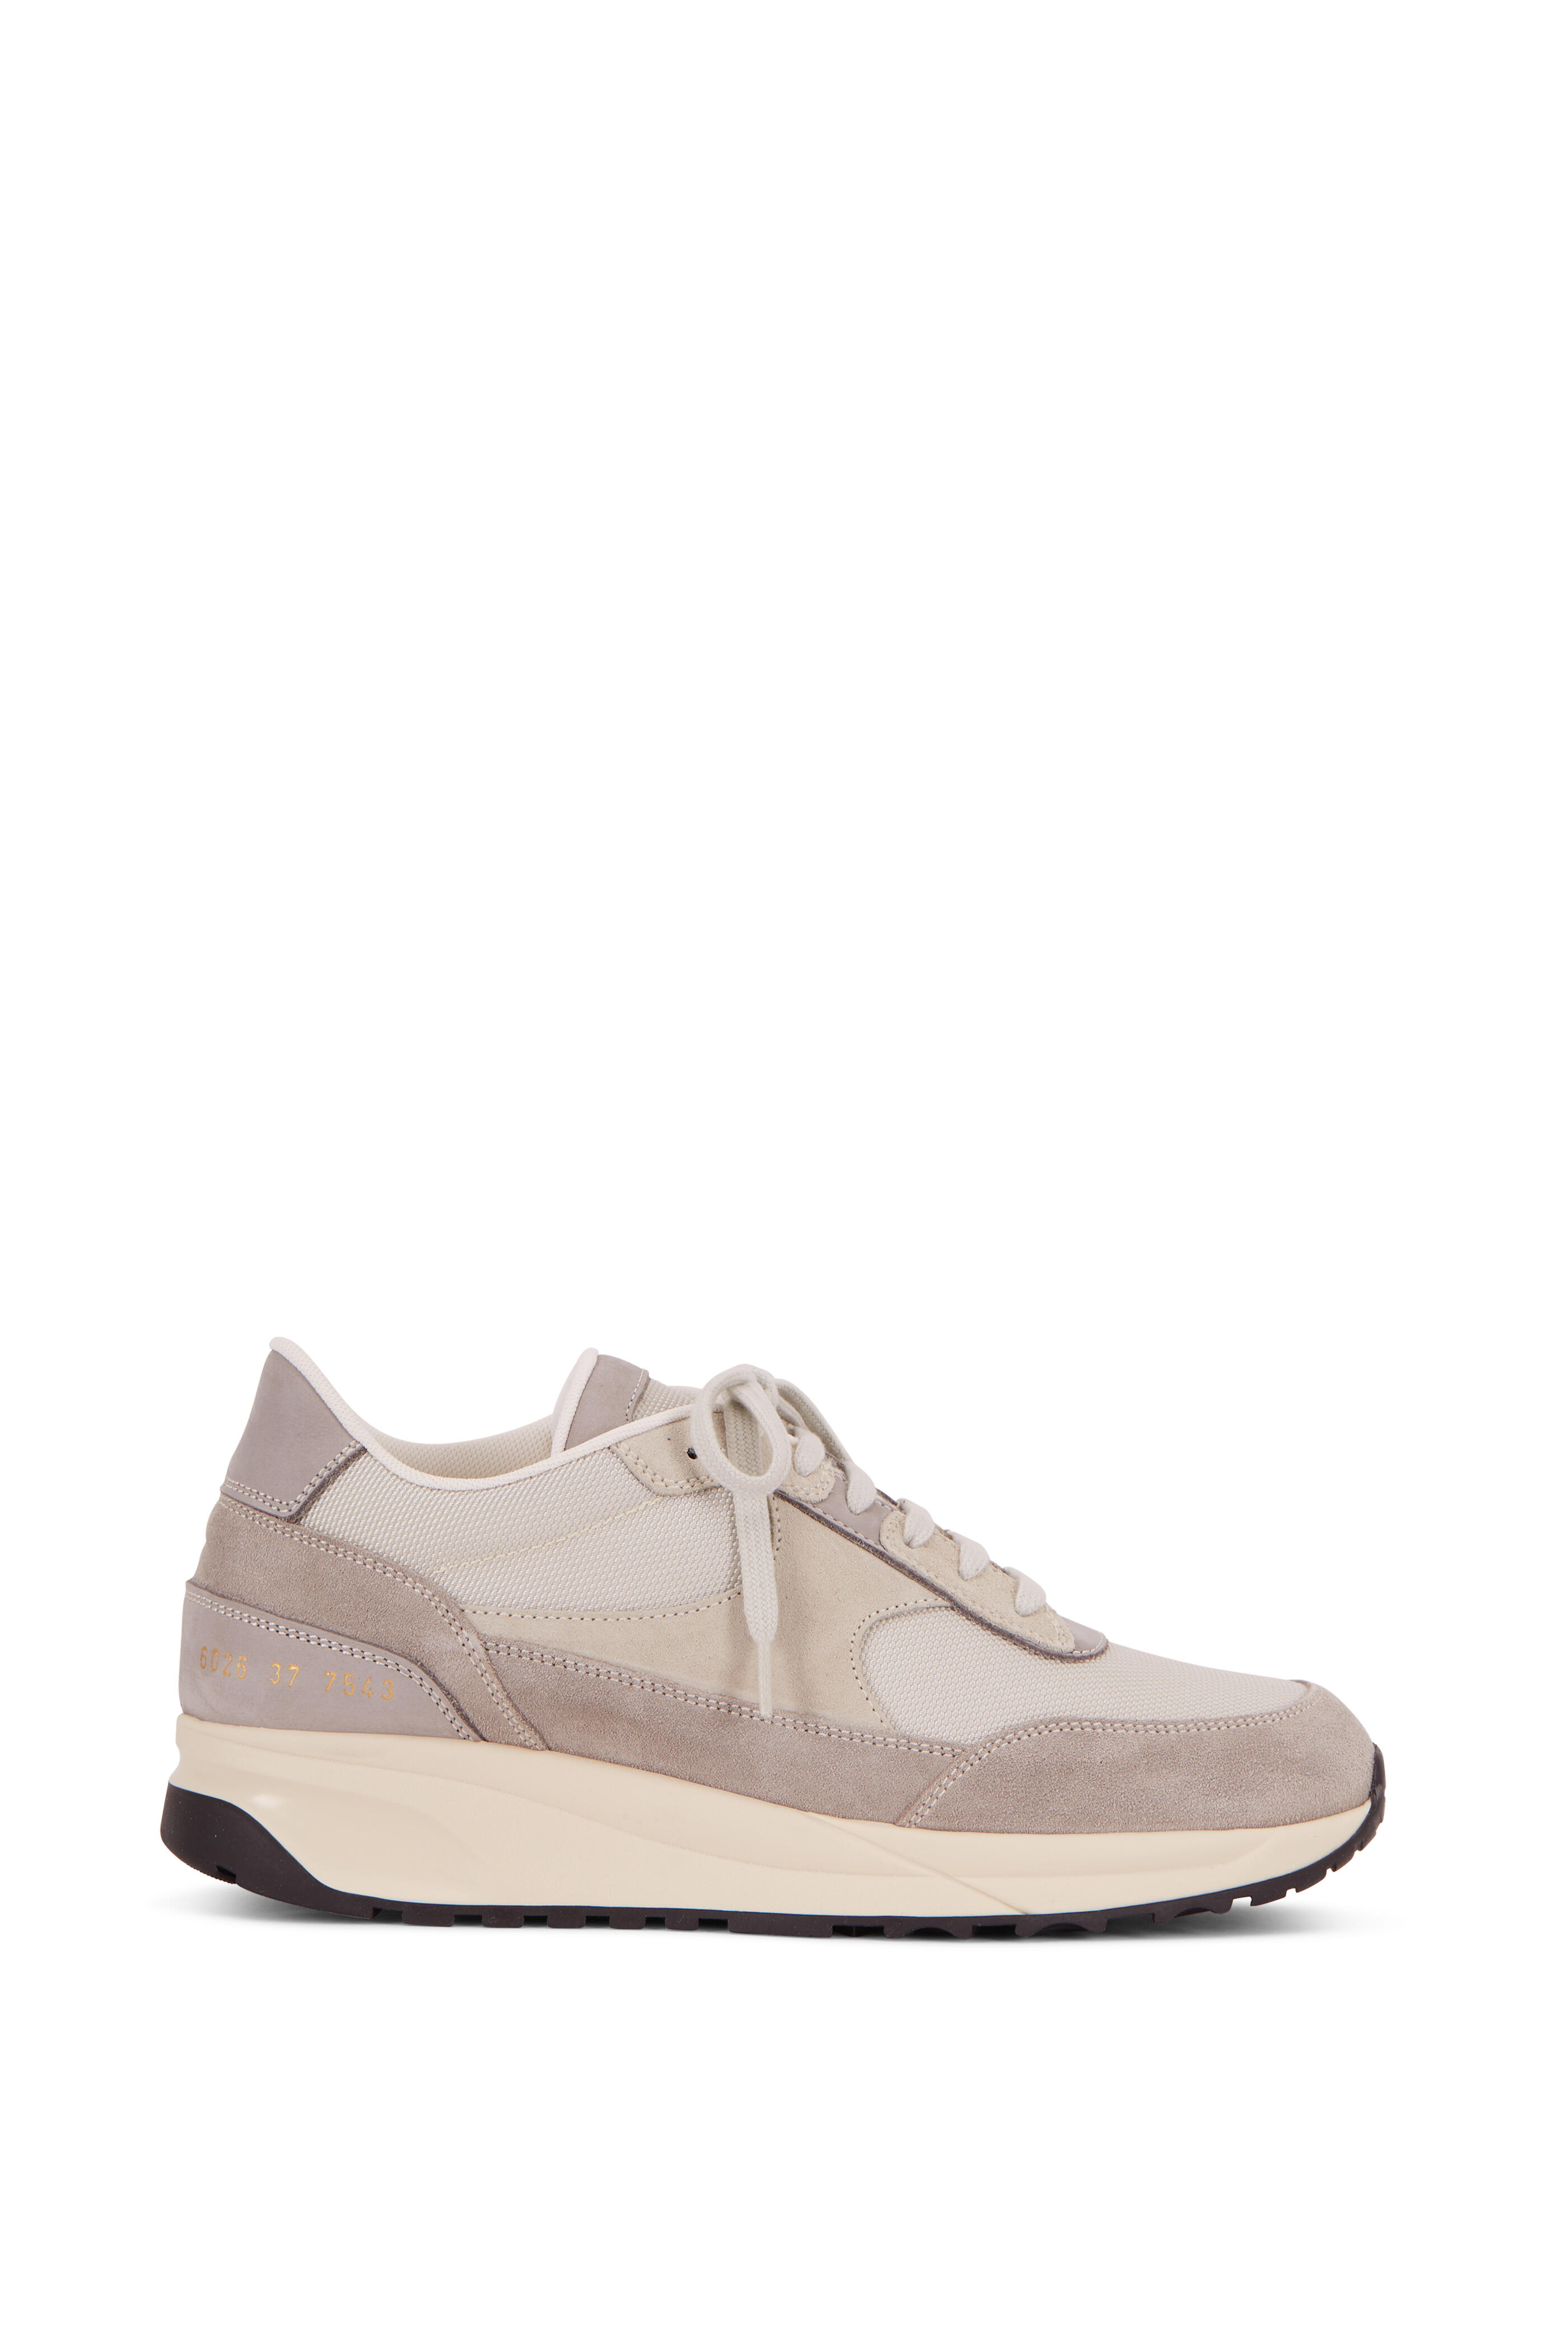 WOMAN by COMMON PROJECTS - Track Light Gray Mesh & Suede Classic Sneaker